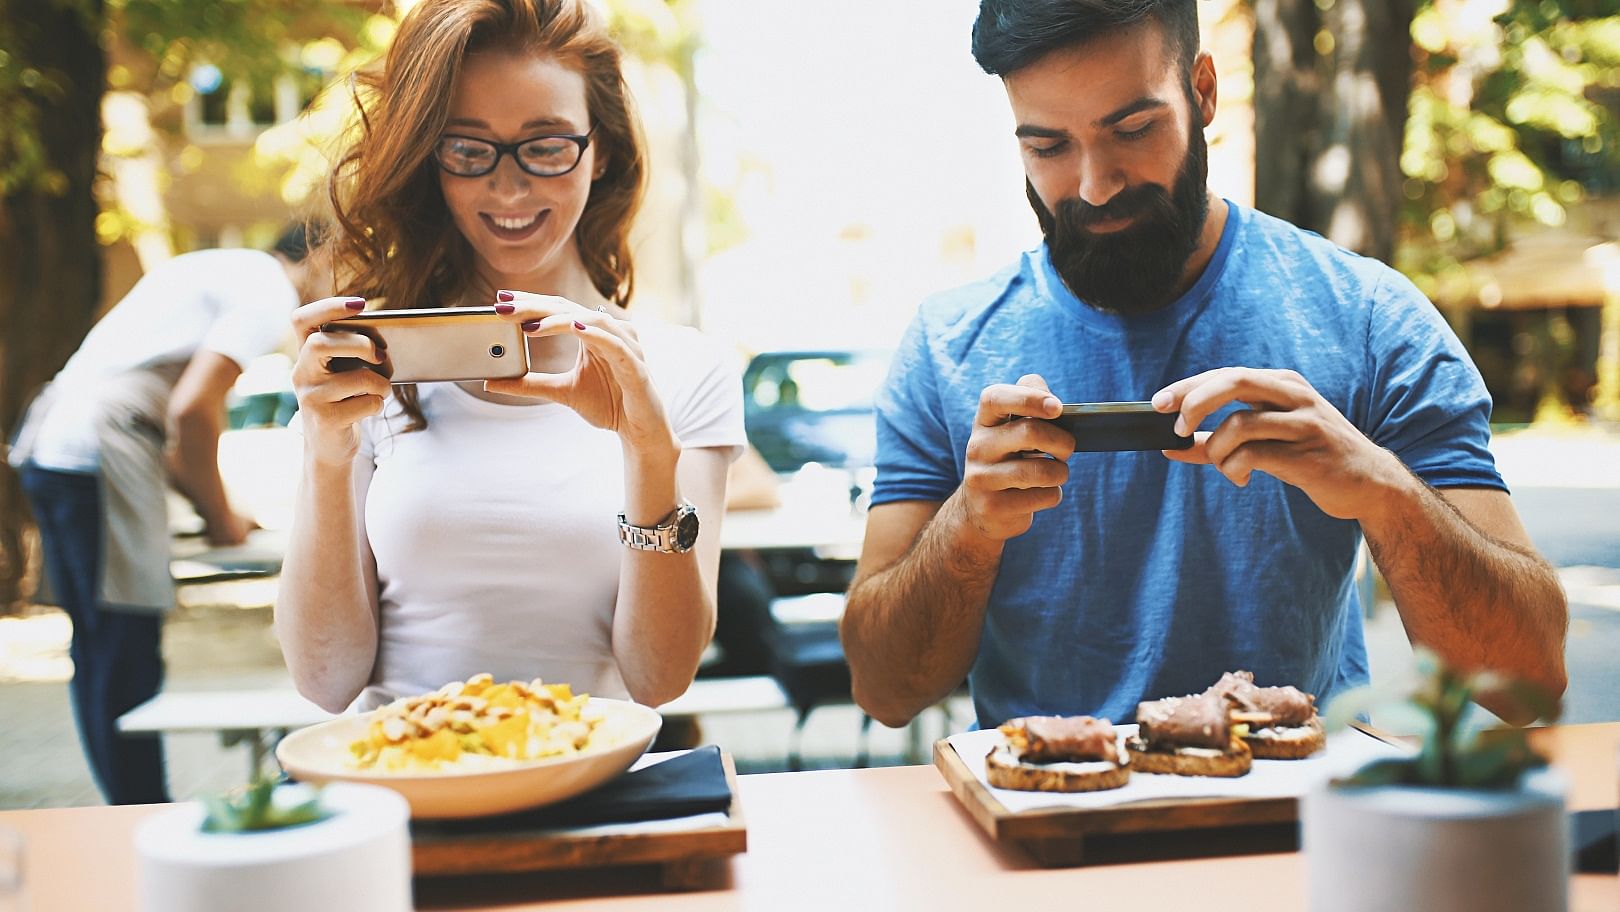 Food bloggers and influencers use Instagram, TripAdvisor and Google to share their experiences at a restaurant.